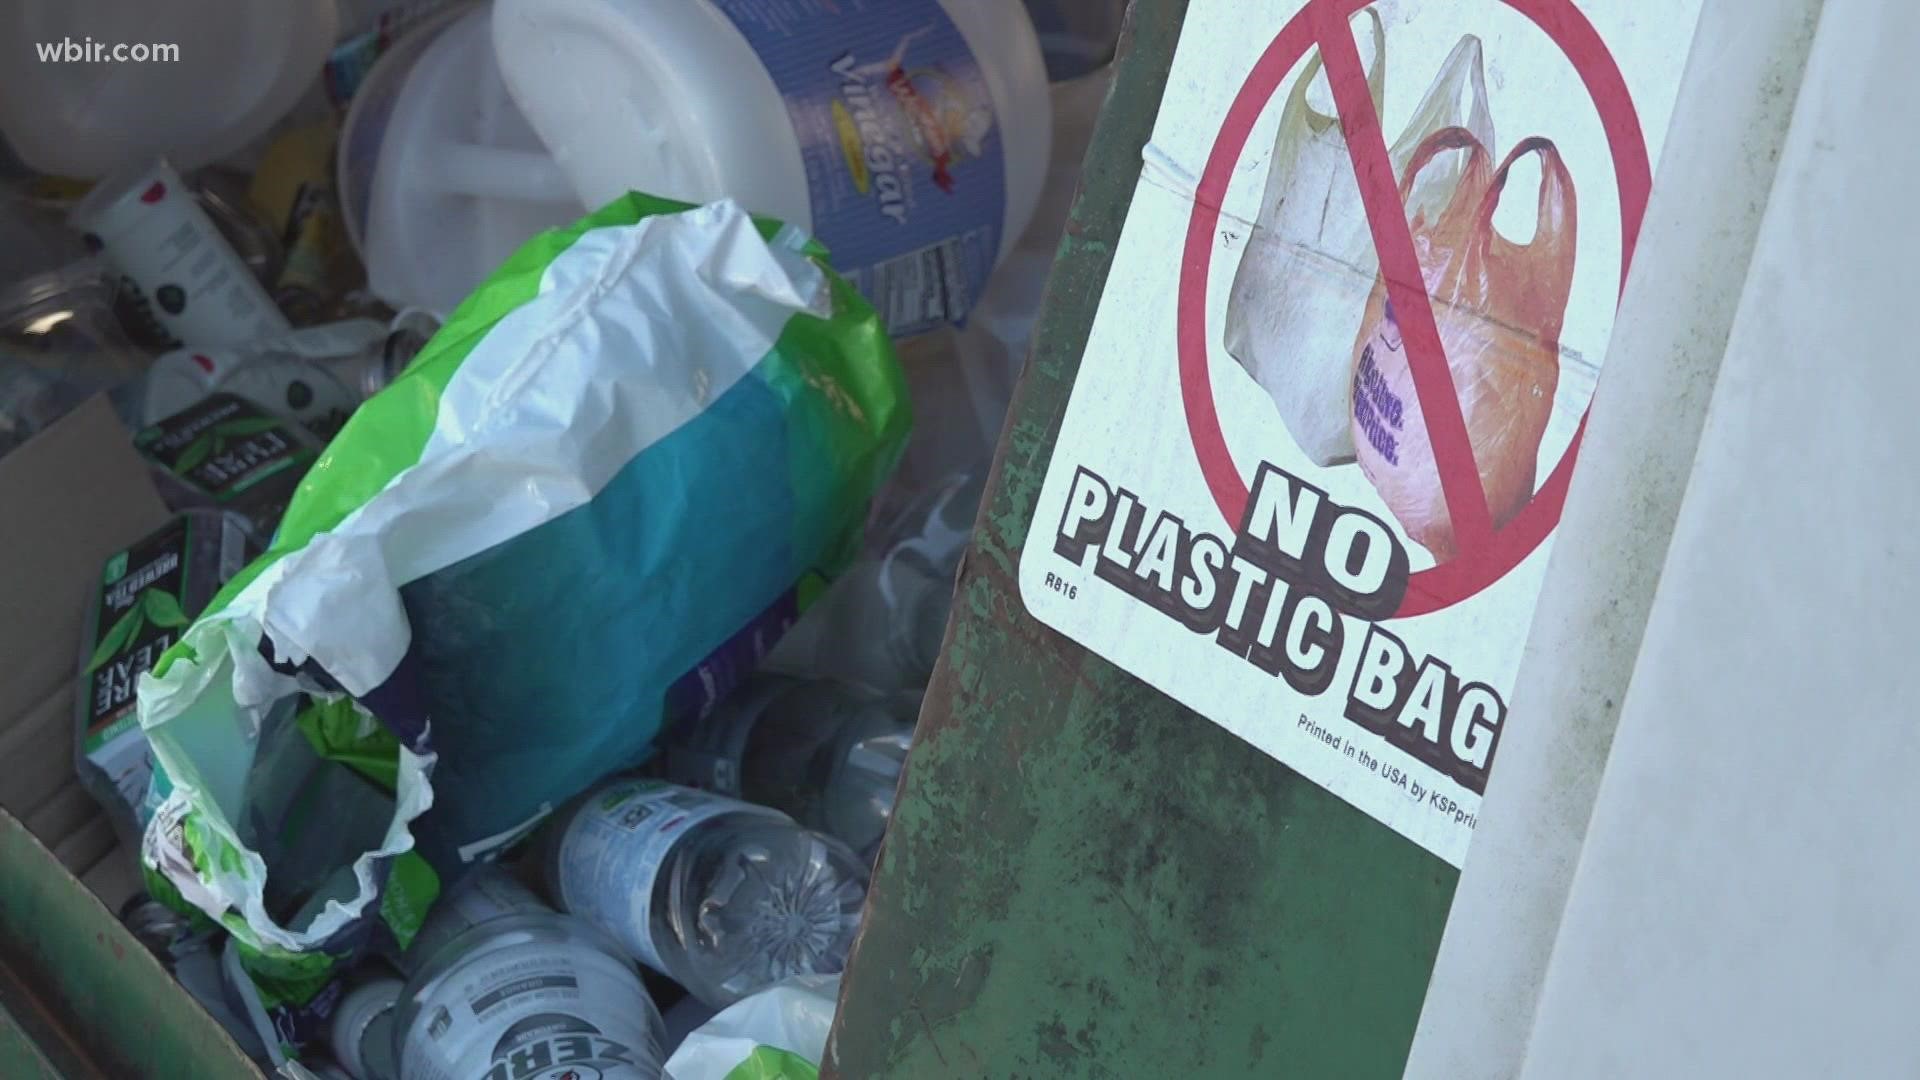 The city said more than 80% of what is thrown away in recycling bins is actually recyclable.